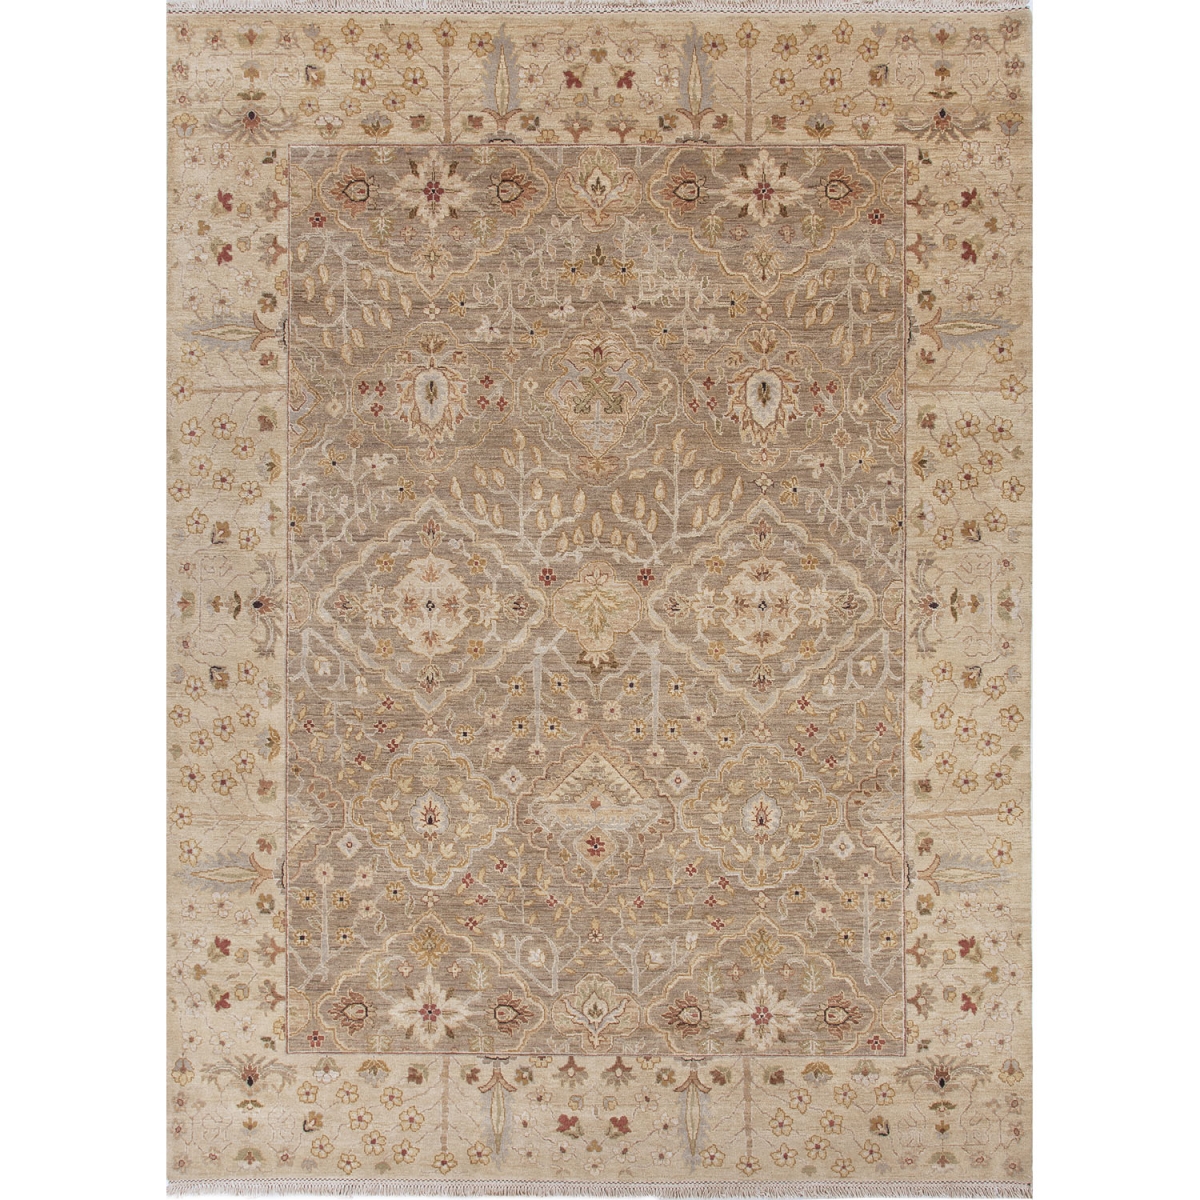 Rug103302 6 X 9 Ft. Opus Allegro Hand-knotted Floral Cream & Maroon Area Rug